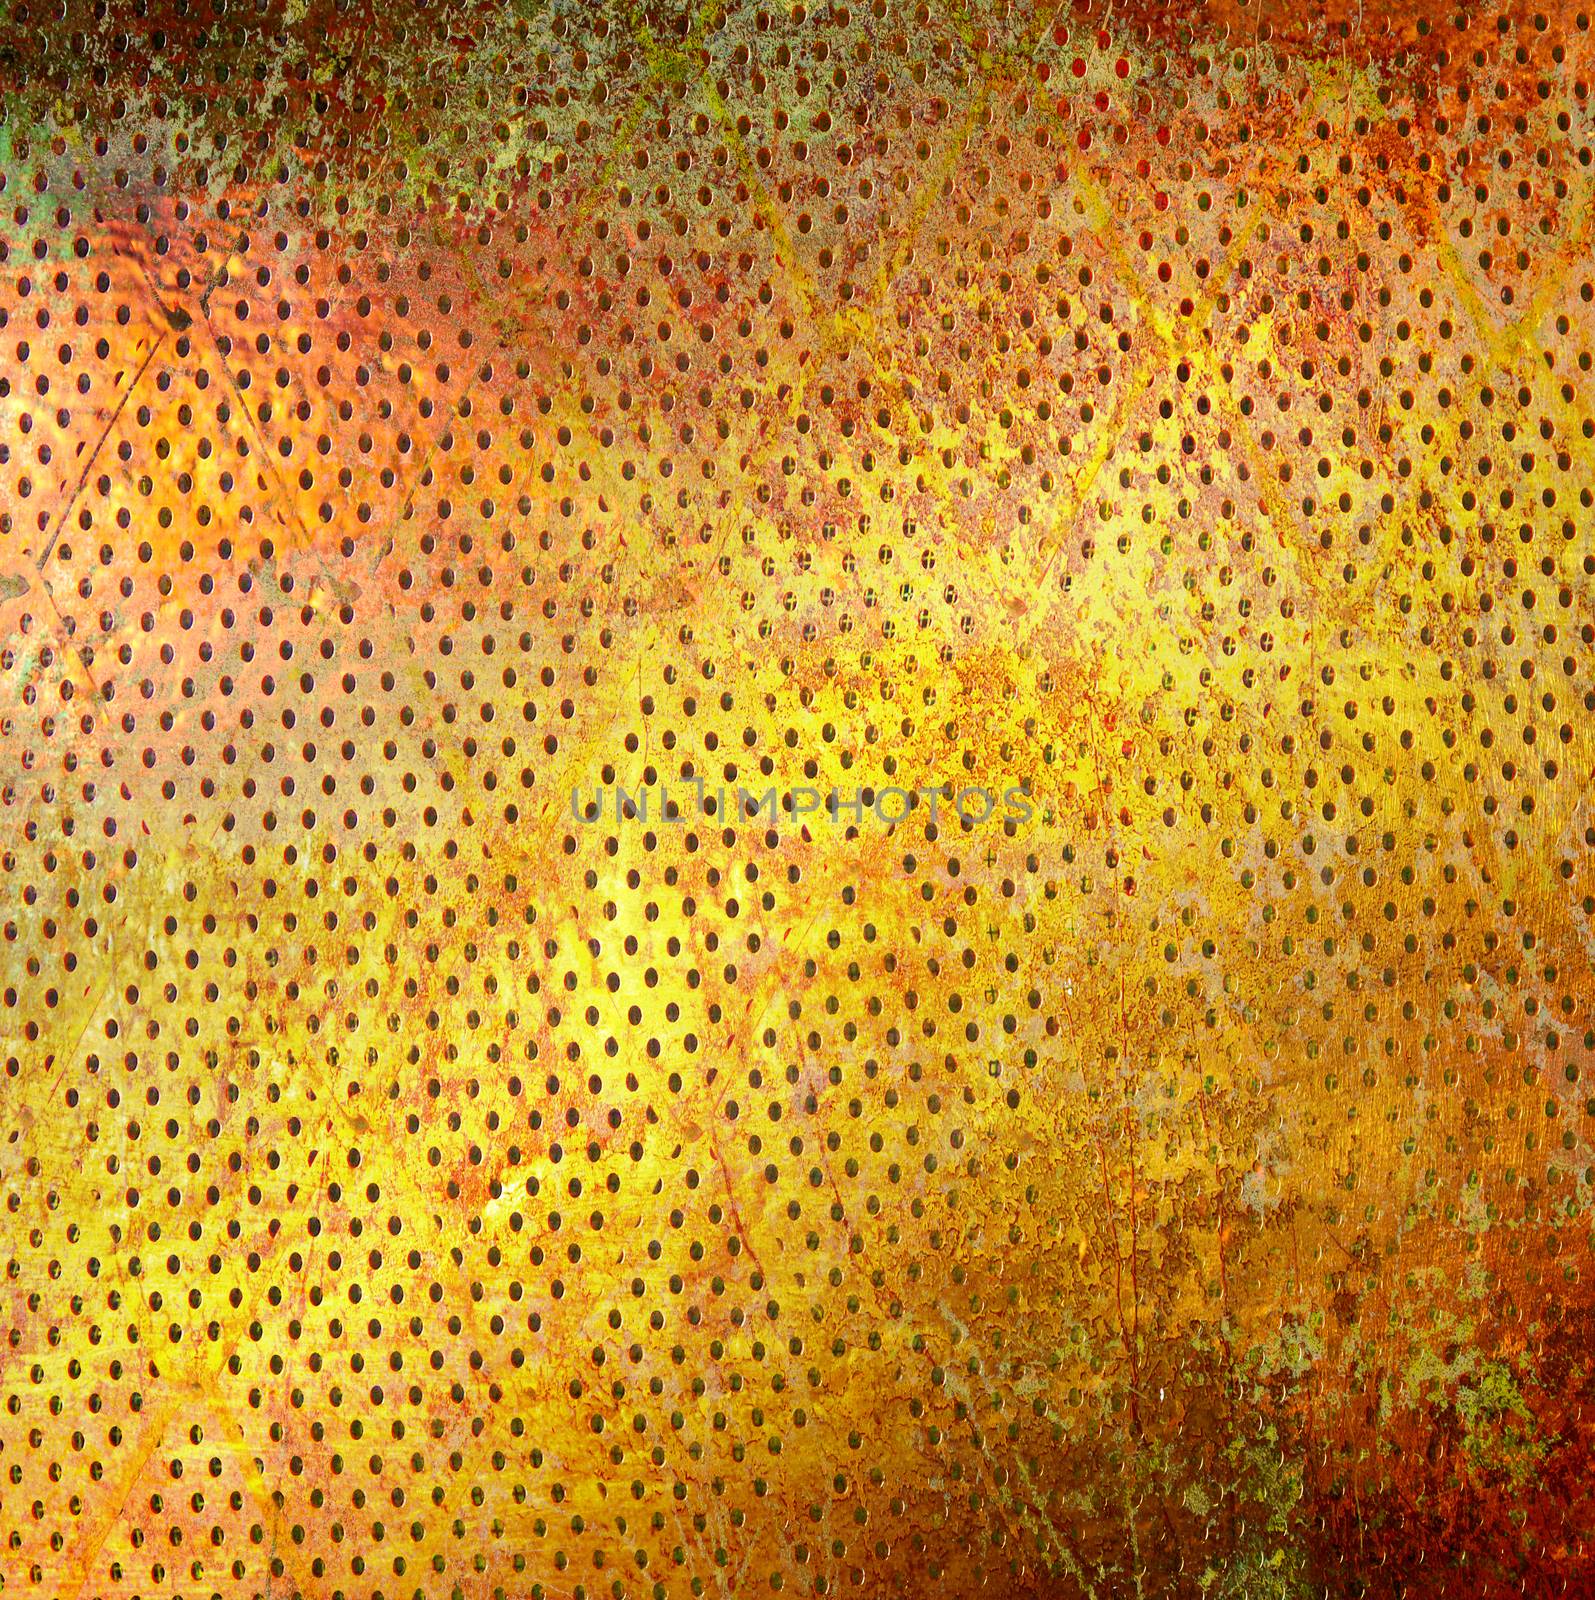 abstract the old grunge wall for background